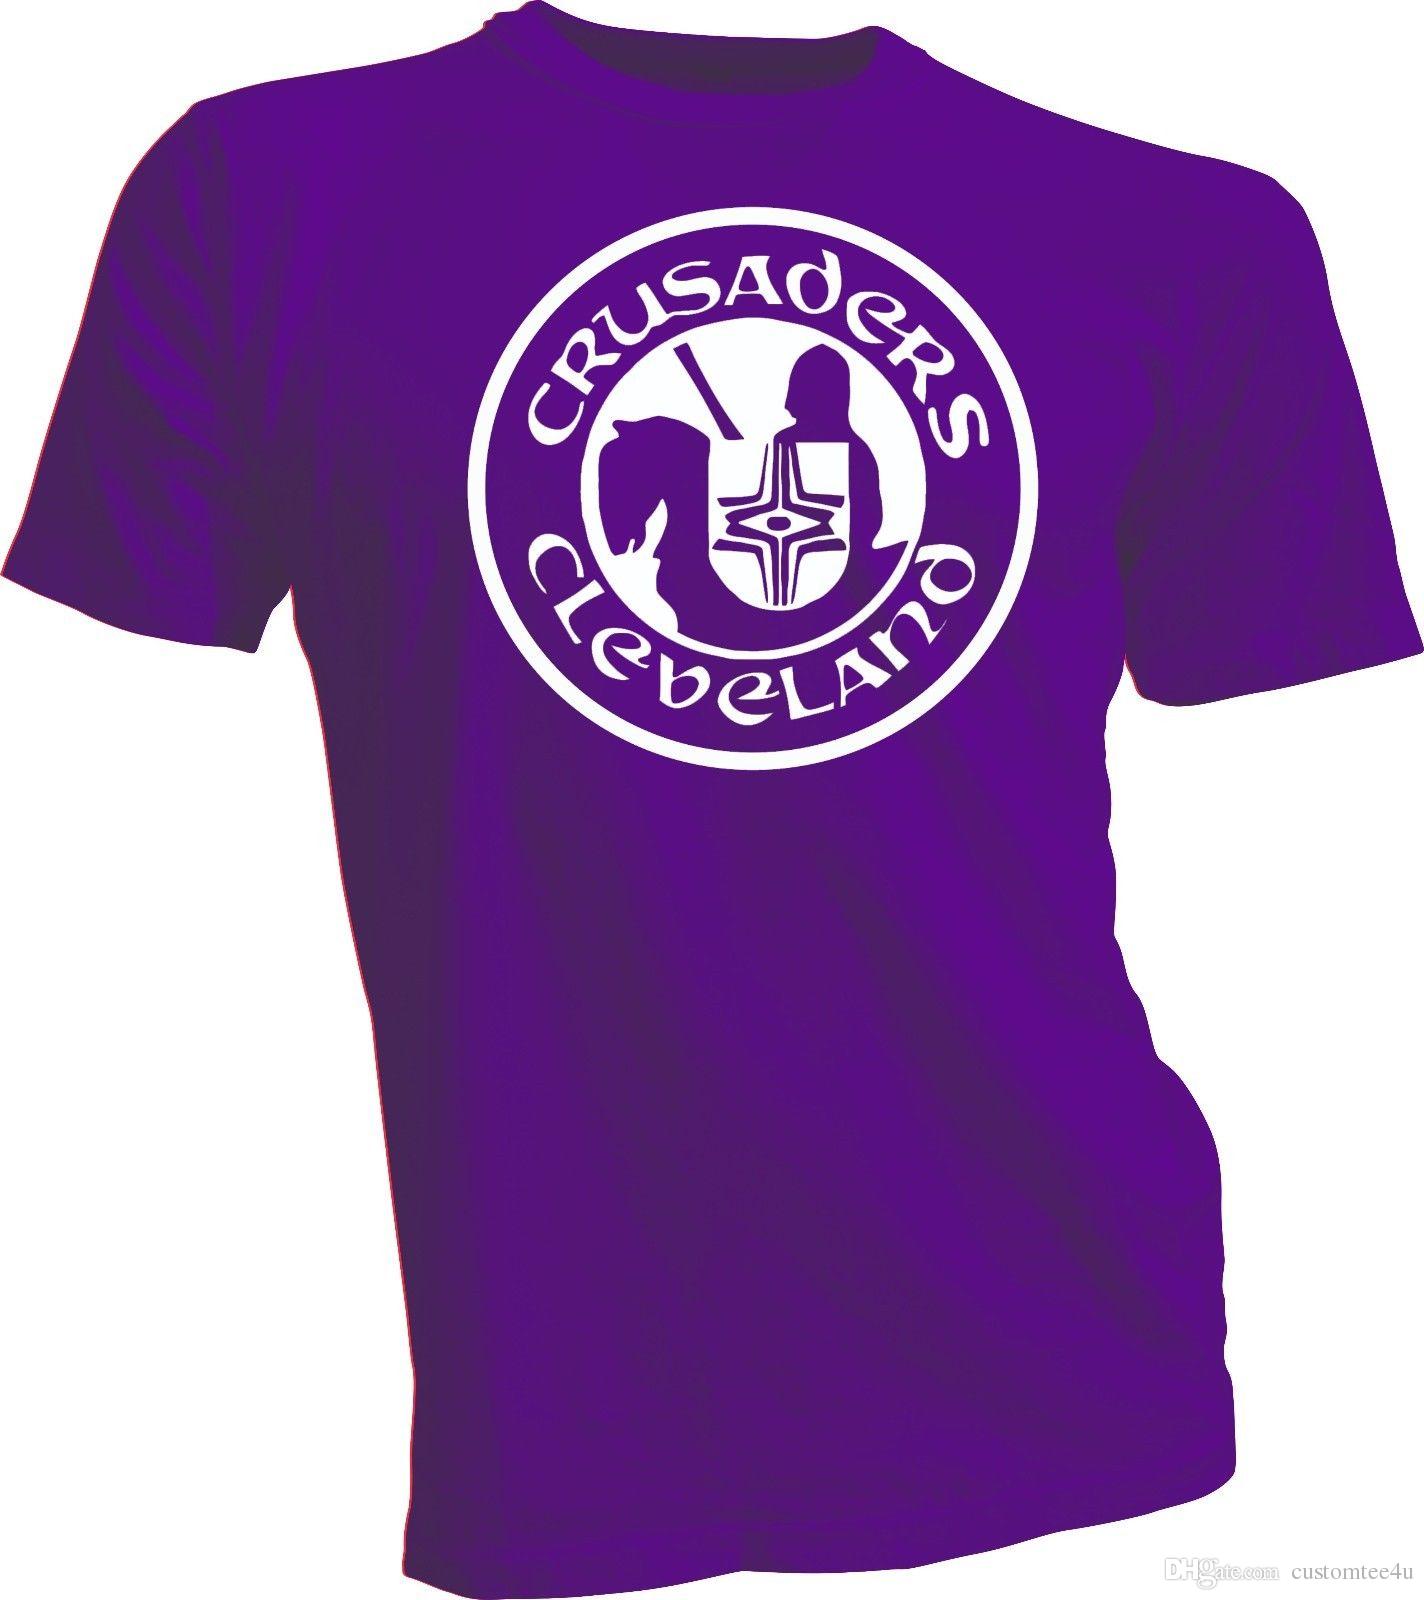 Cleveland Crusaders Logo - Cleveland Crusaders Defunct Old Time Wha Hockey Tee T Shirt New ...